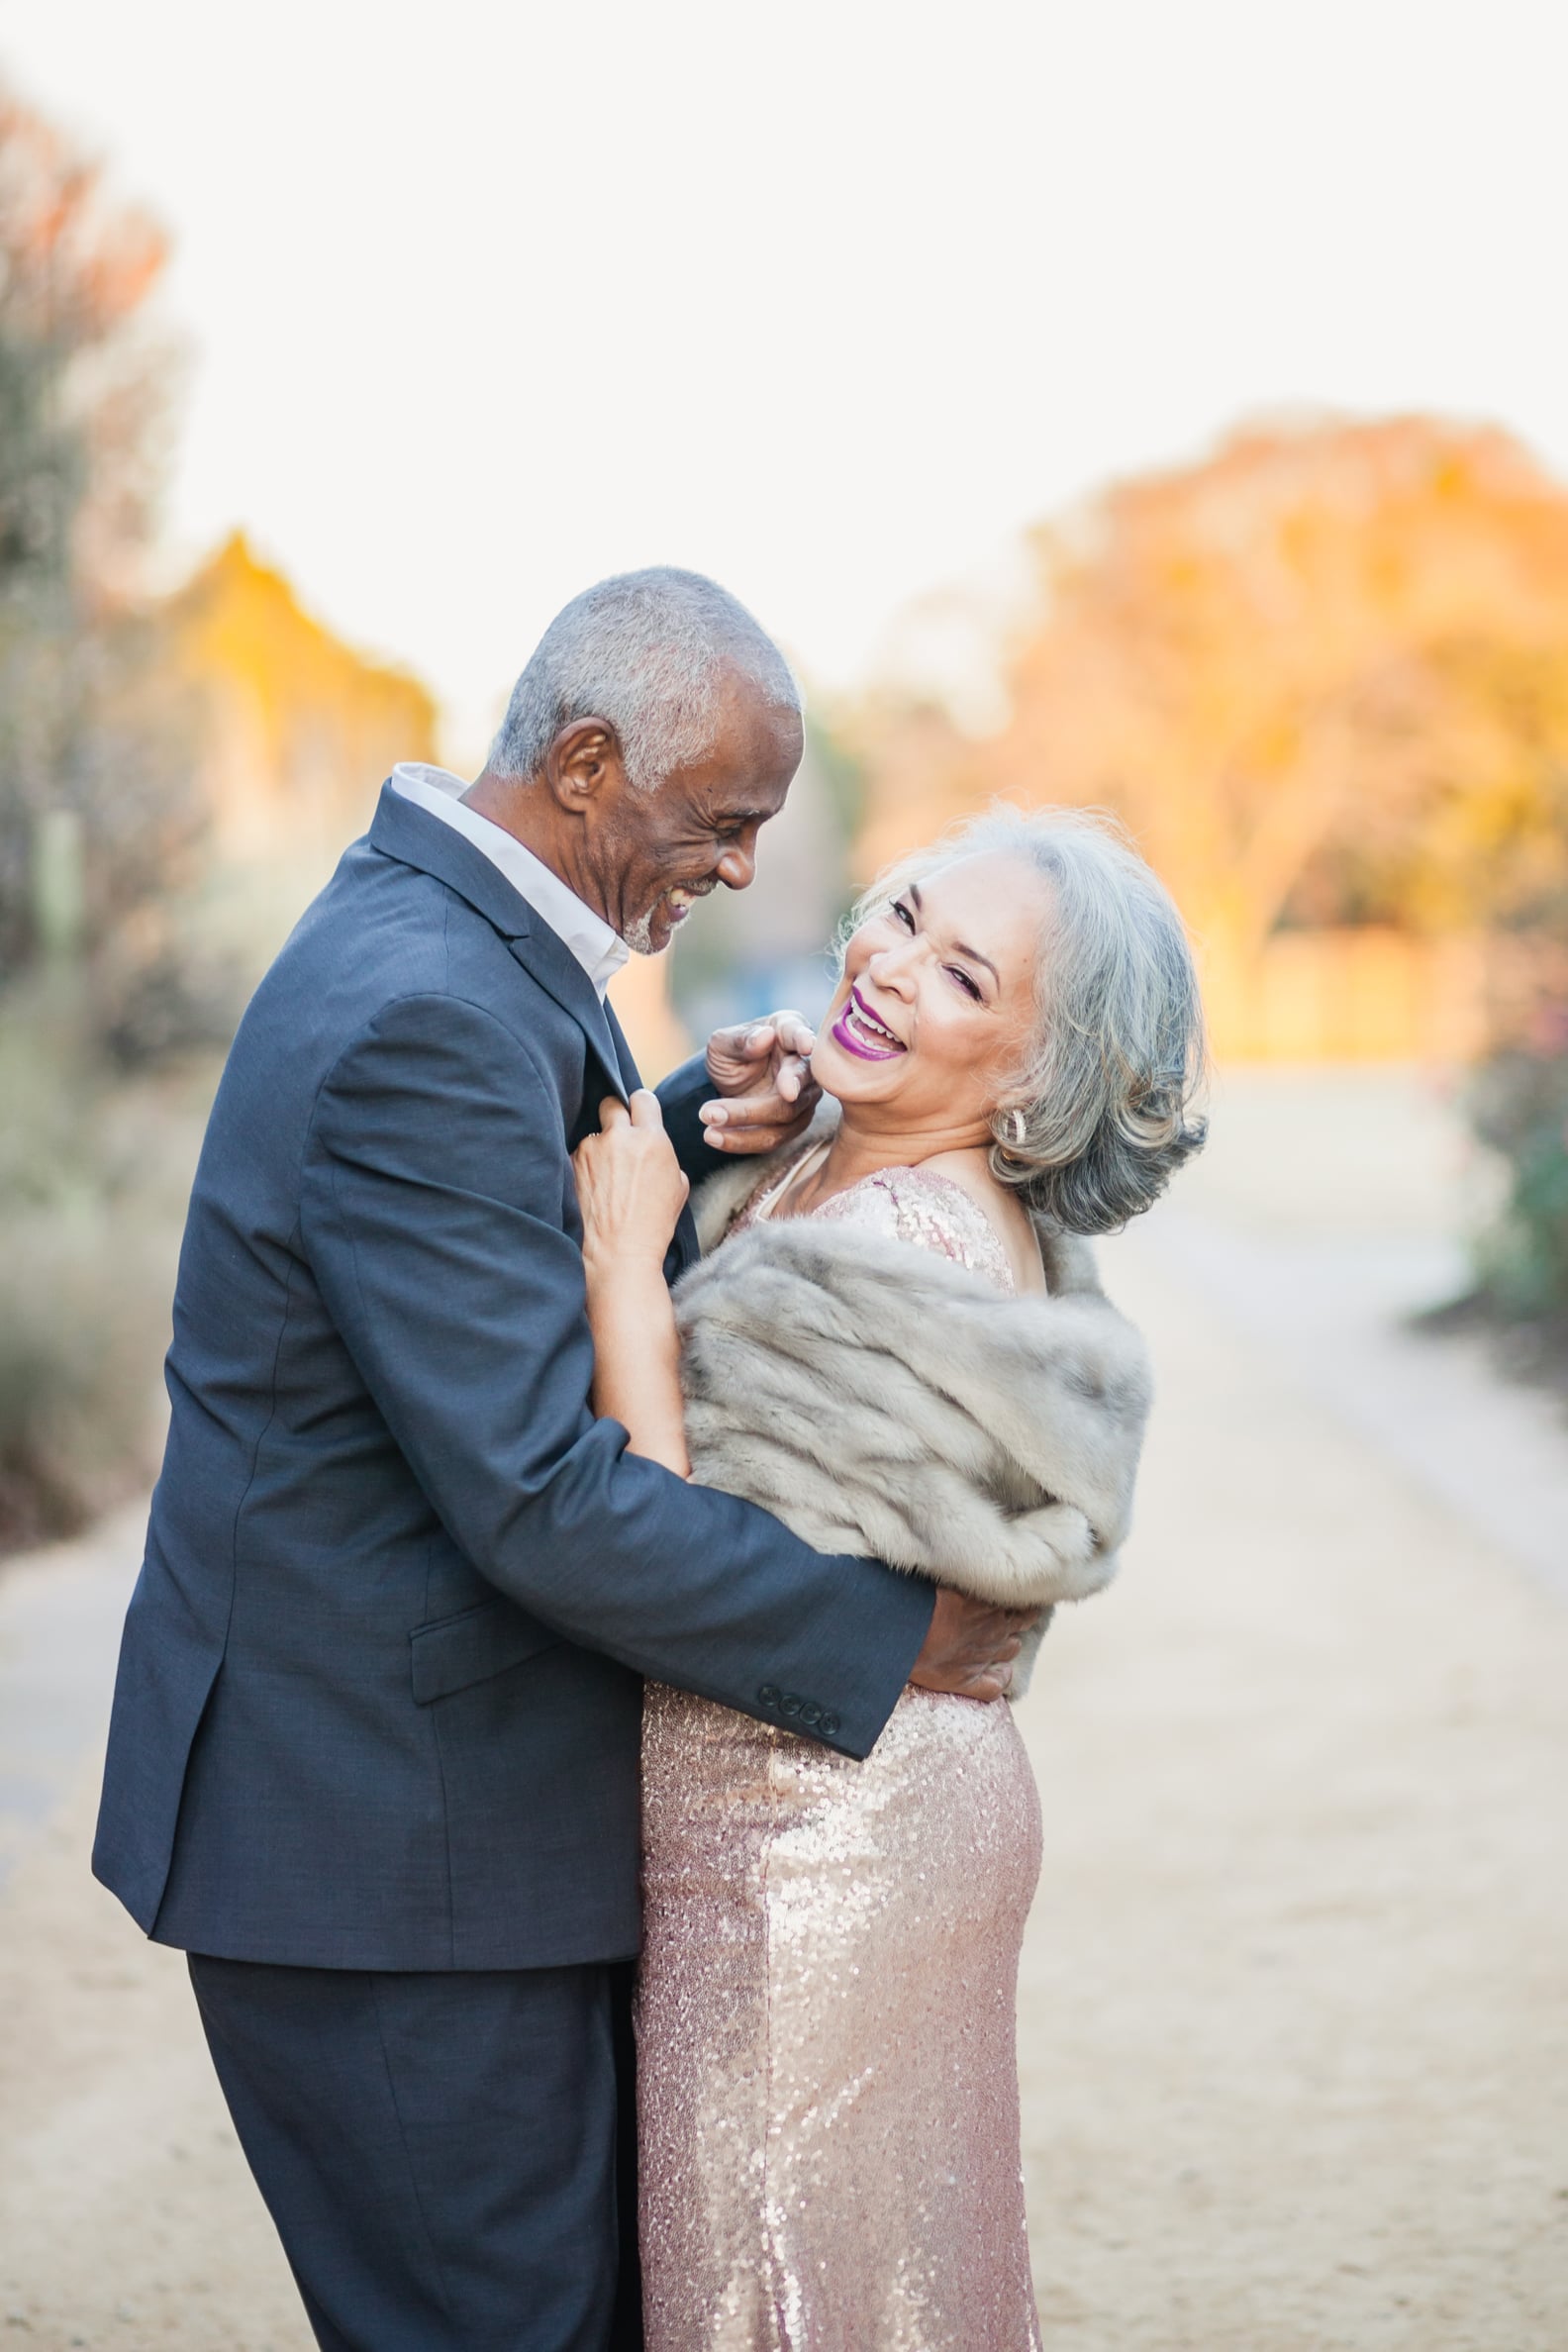 Couple Married For 47 Years Beat Cancer Twice | POPSUGAR Family